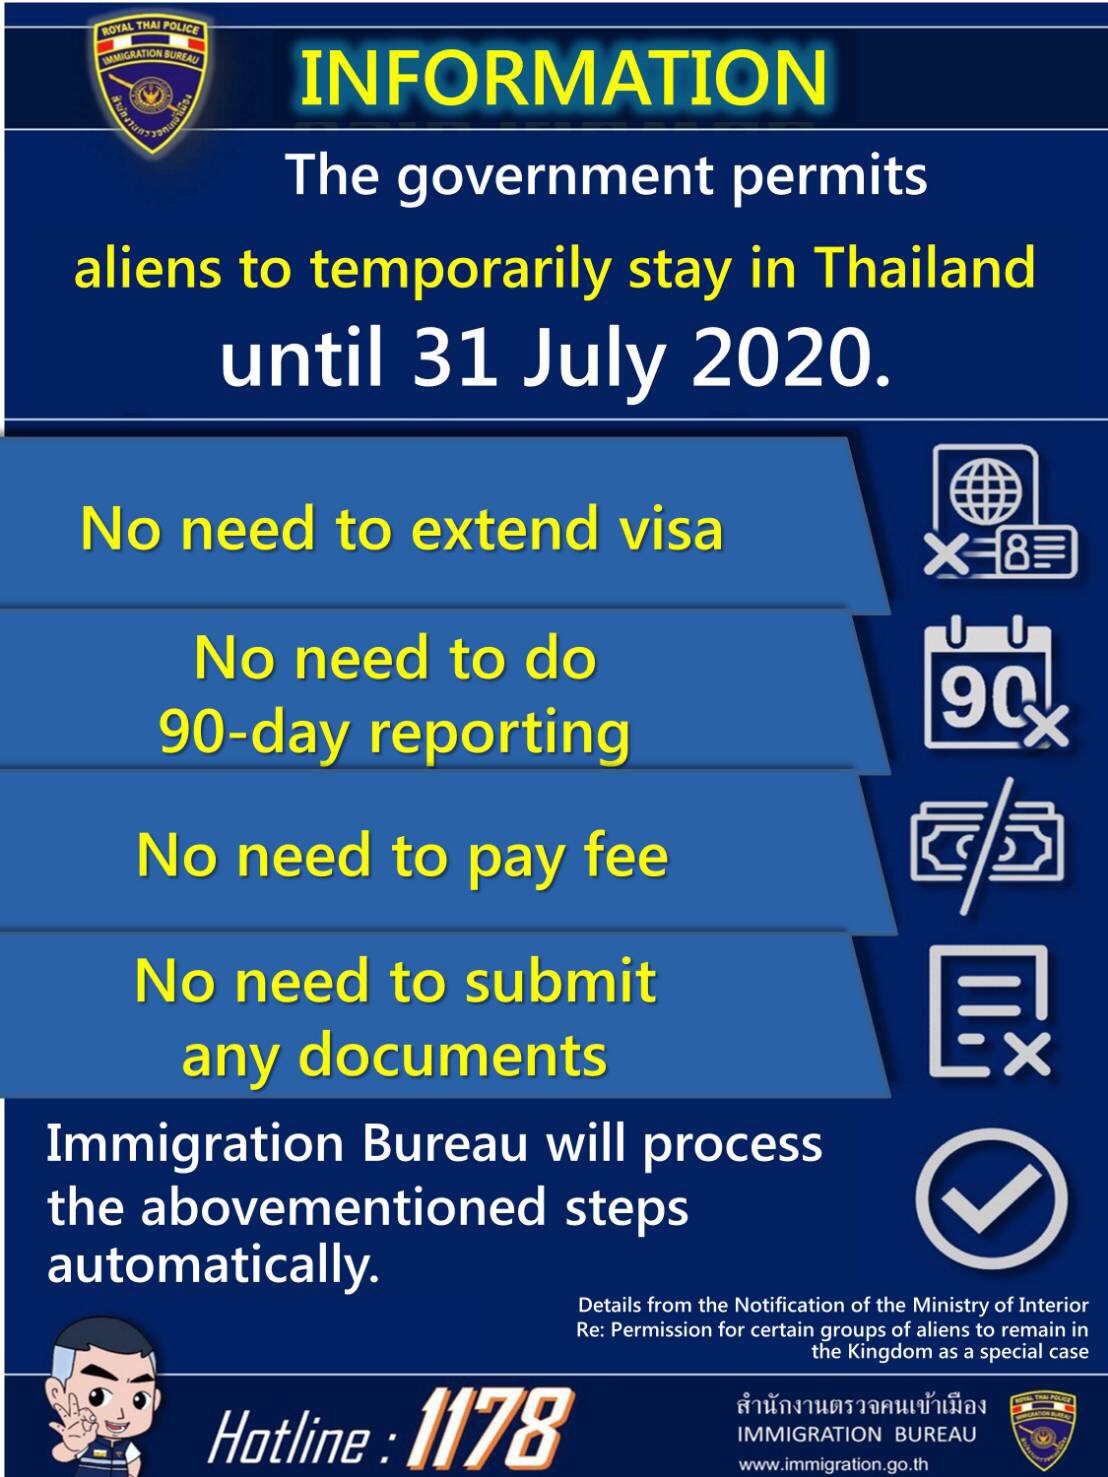 Information for aliens to temporarily stay in Thailand